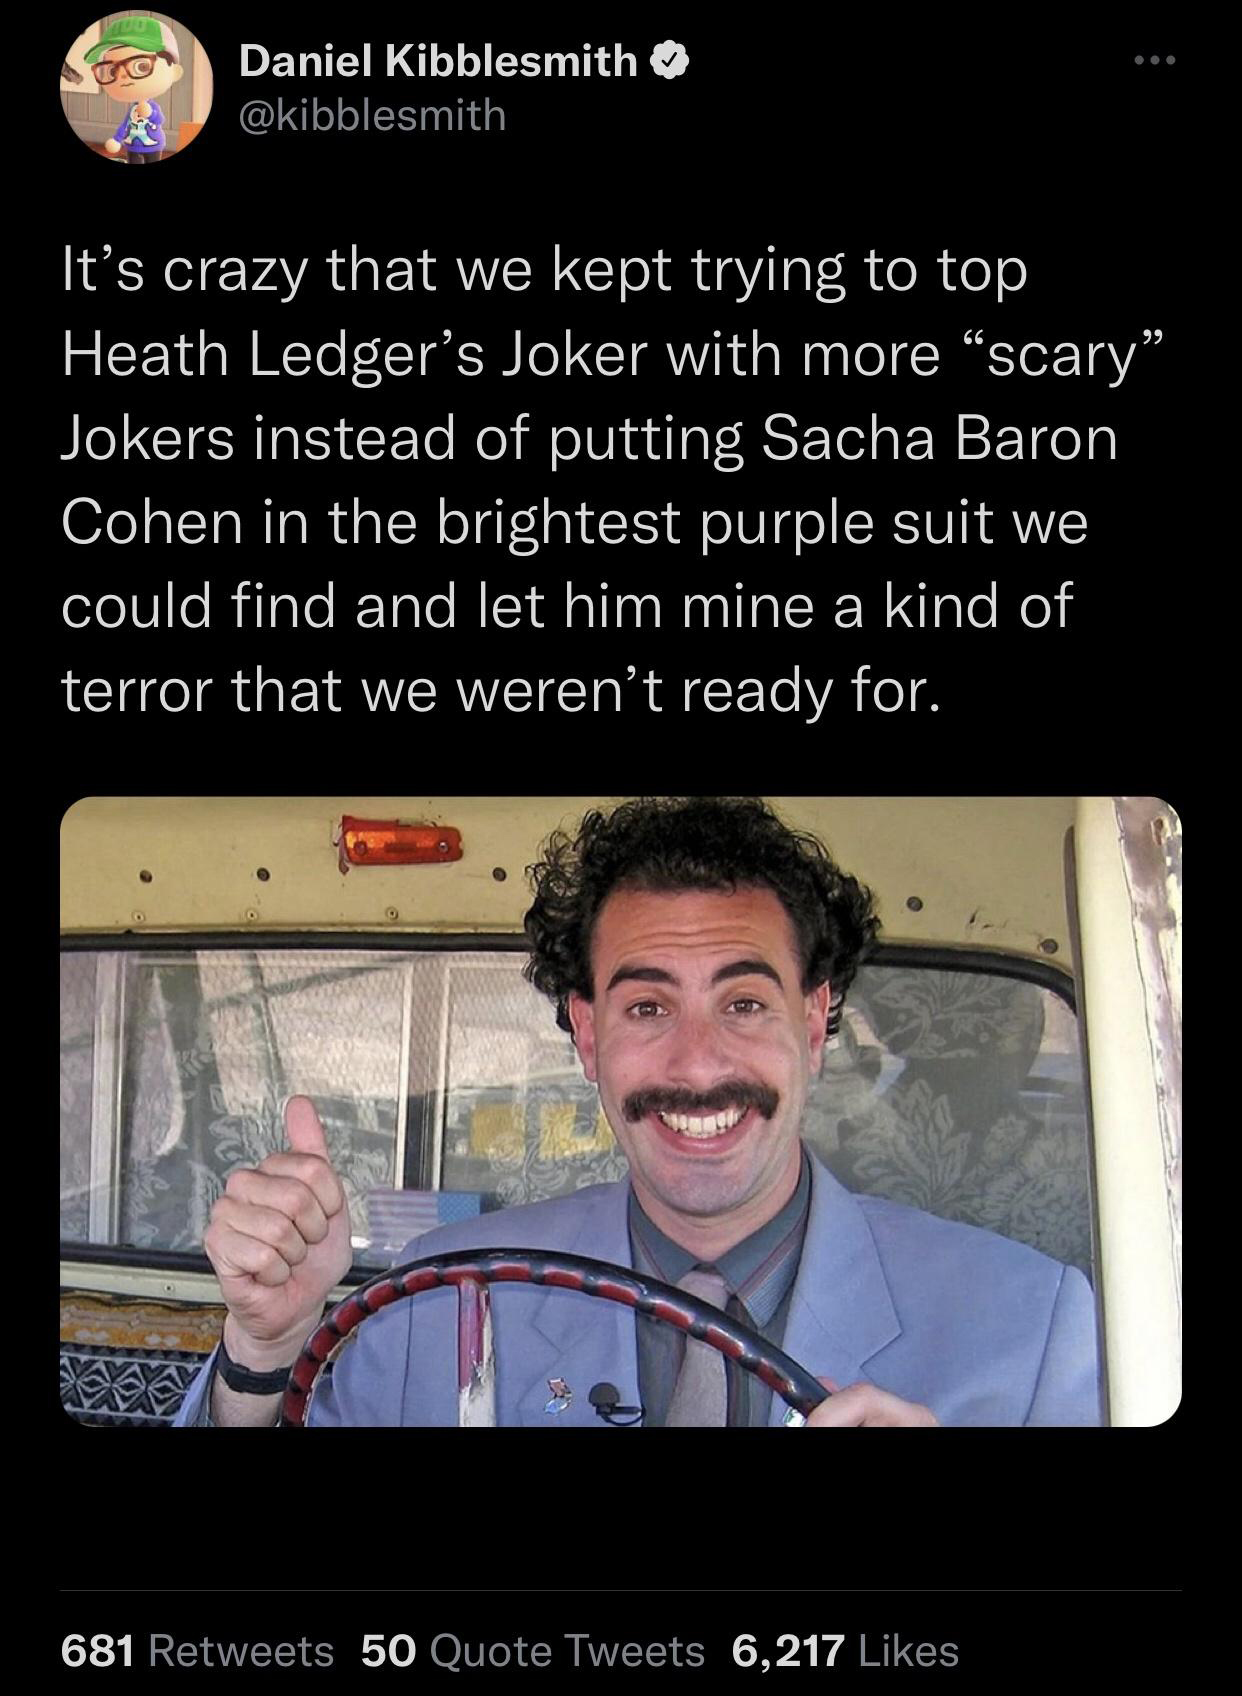 funny tweets - hot tweets - twitter memes - ali g - Daniel Kibblesmith It's crazy that we kept trying to top Heath Ledger's Joker with more scary" Jokers instead of putting Sacha Baron Cohen in the brightest purple suit we could find and let him mine a ki